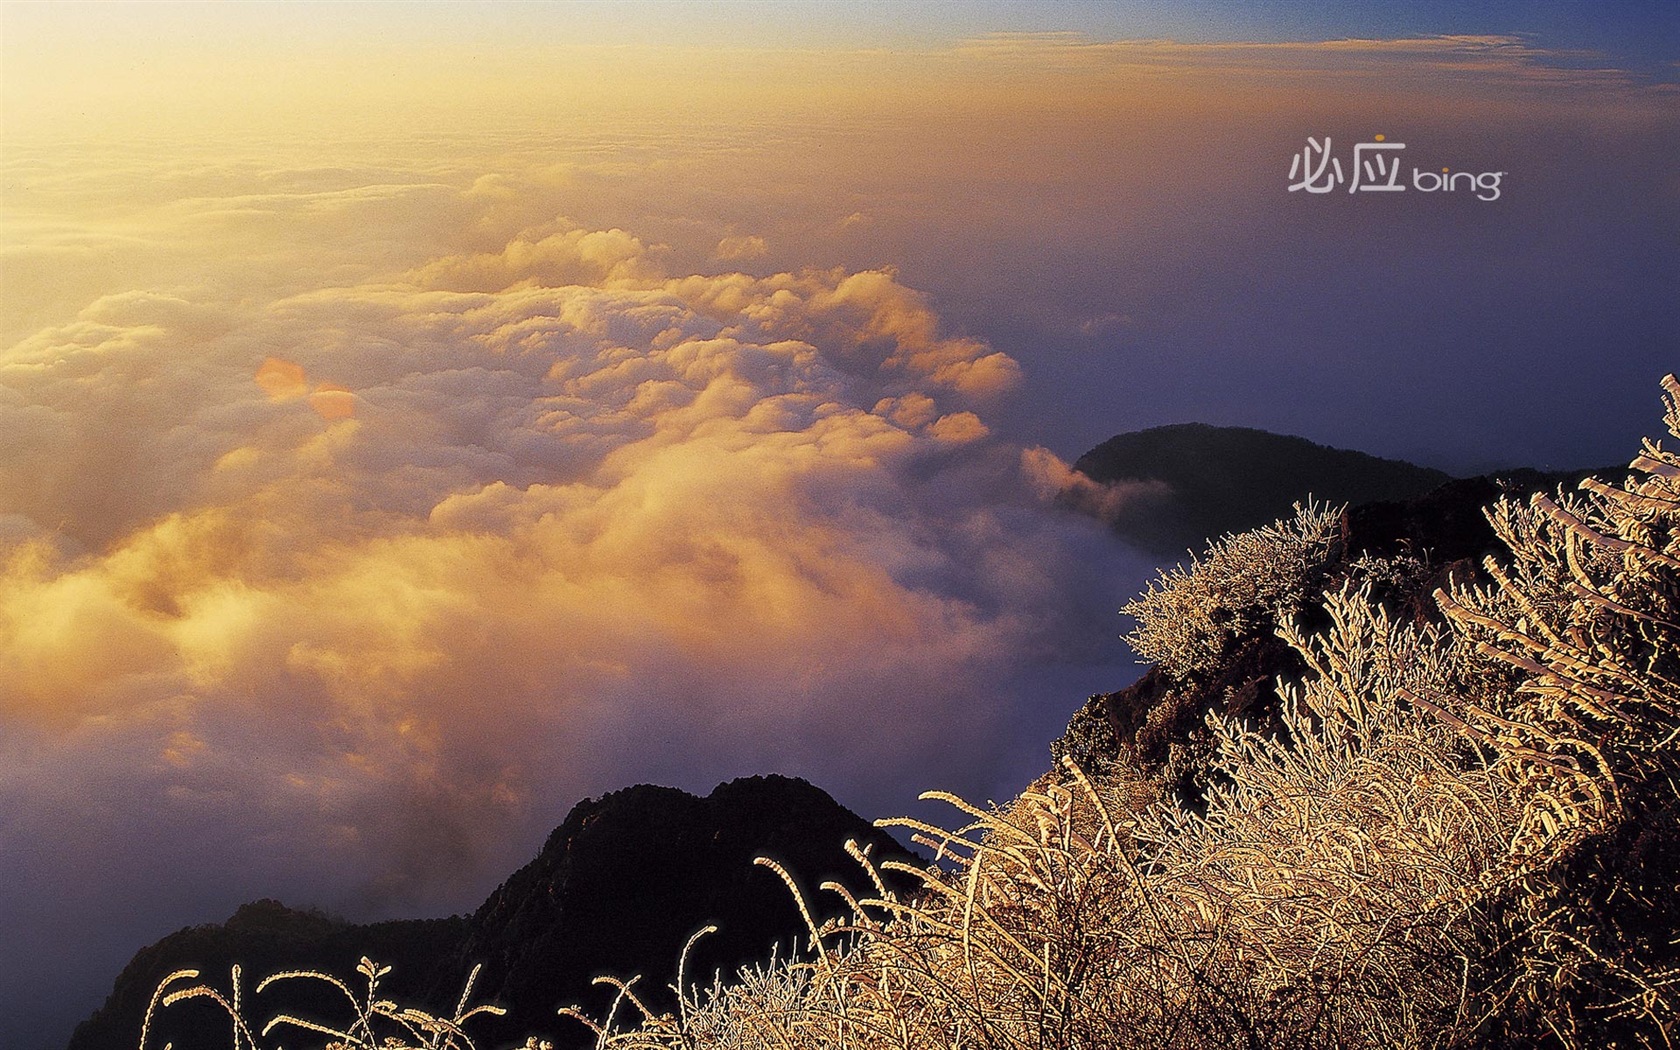 Bing selection best HD wallpapers: China theme wallpaper (2) #14 - 1680x1050